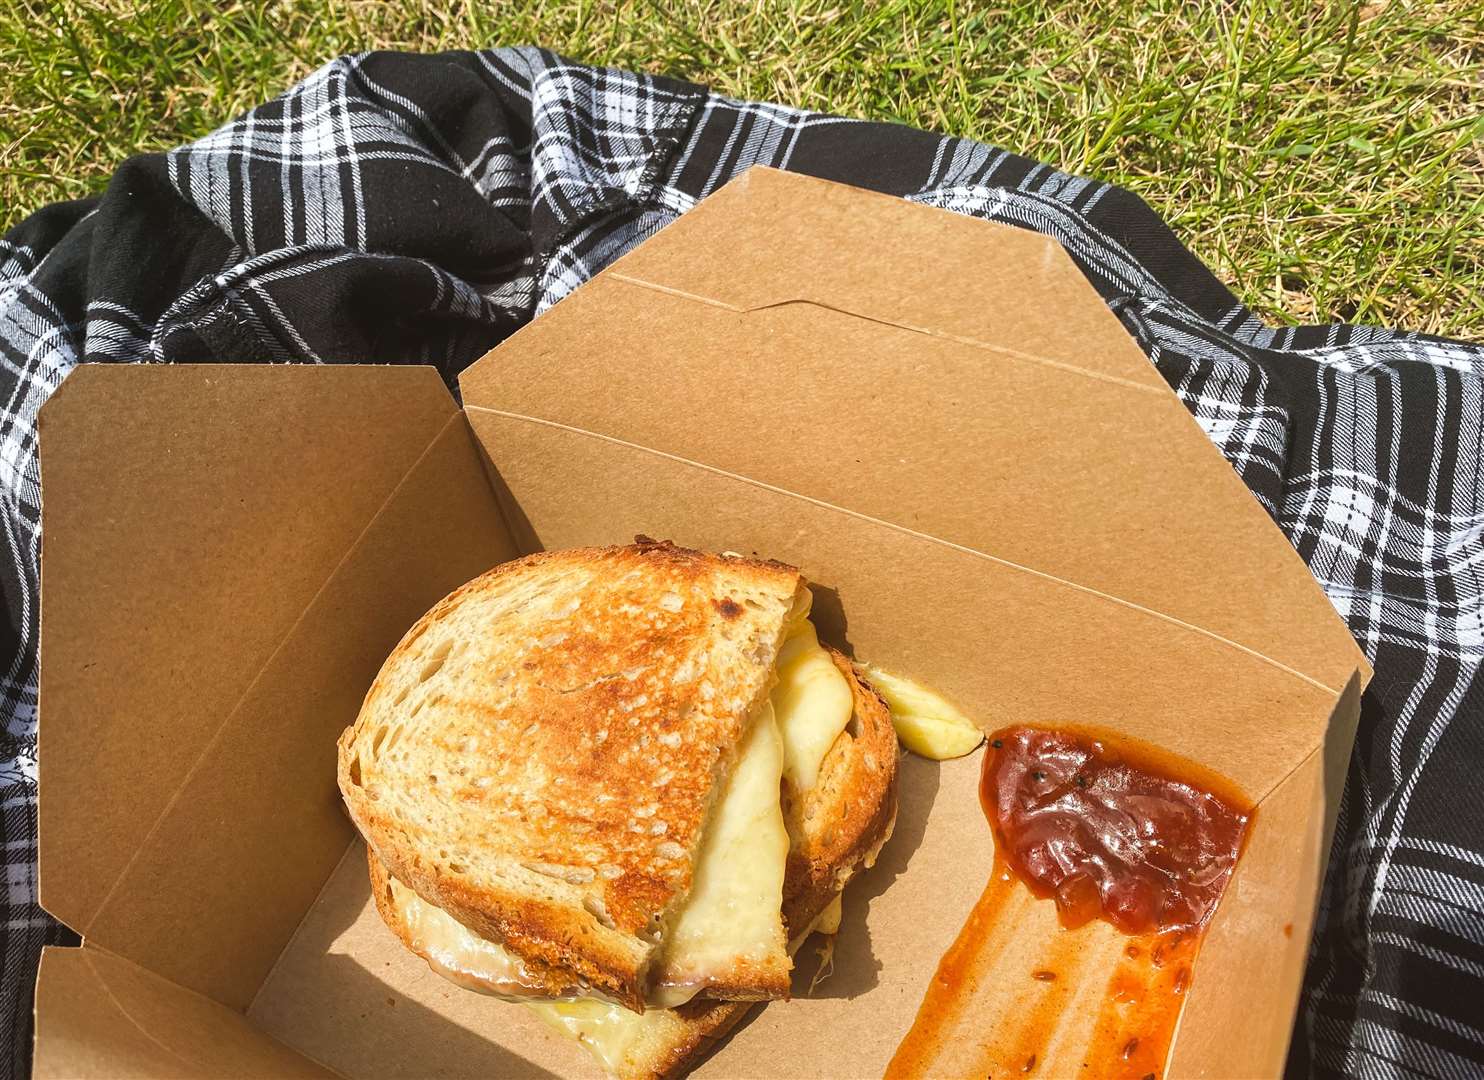 The triple cheese toastie was nice, but didn't have as much flavour as I wanted. Picture: Sam Lawrie